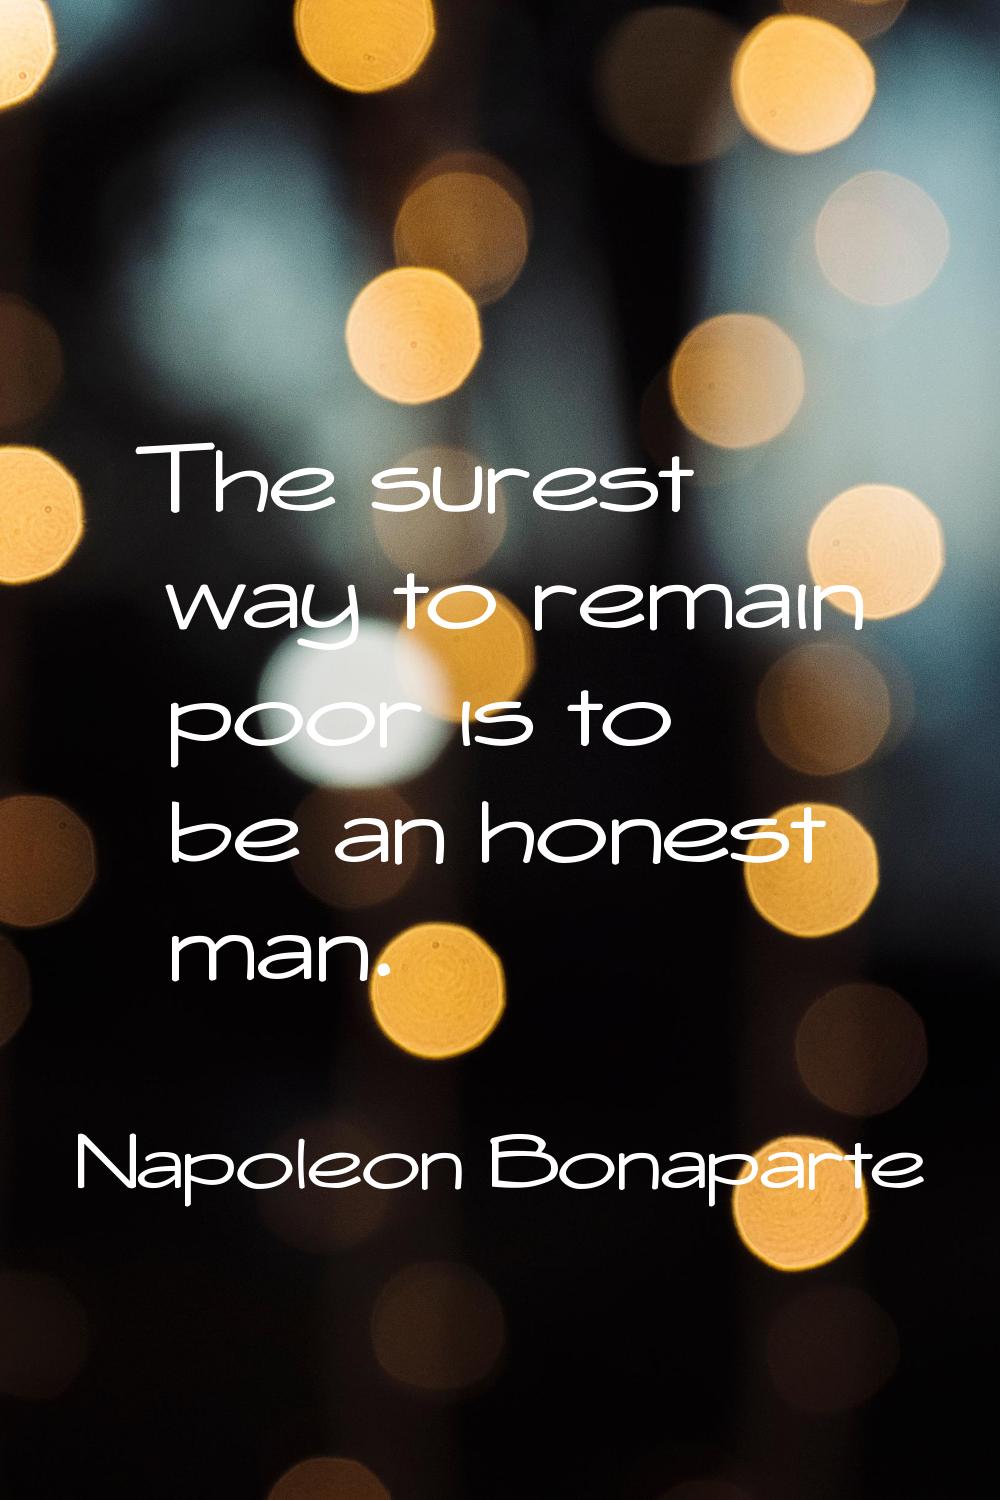 The surest way to remain poor is to be an honest man.